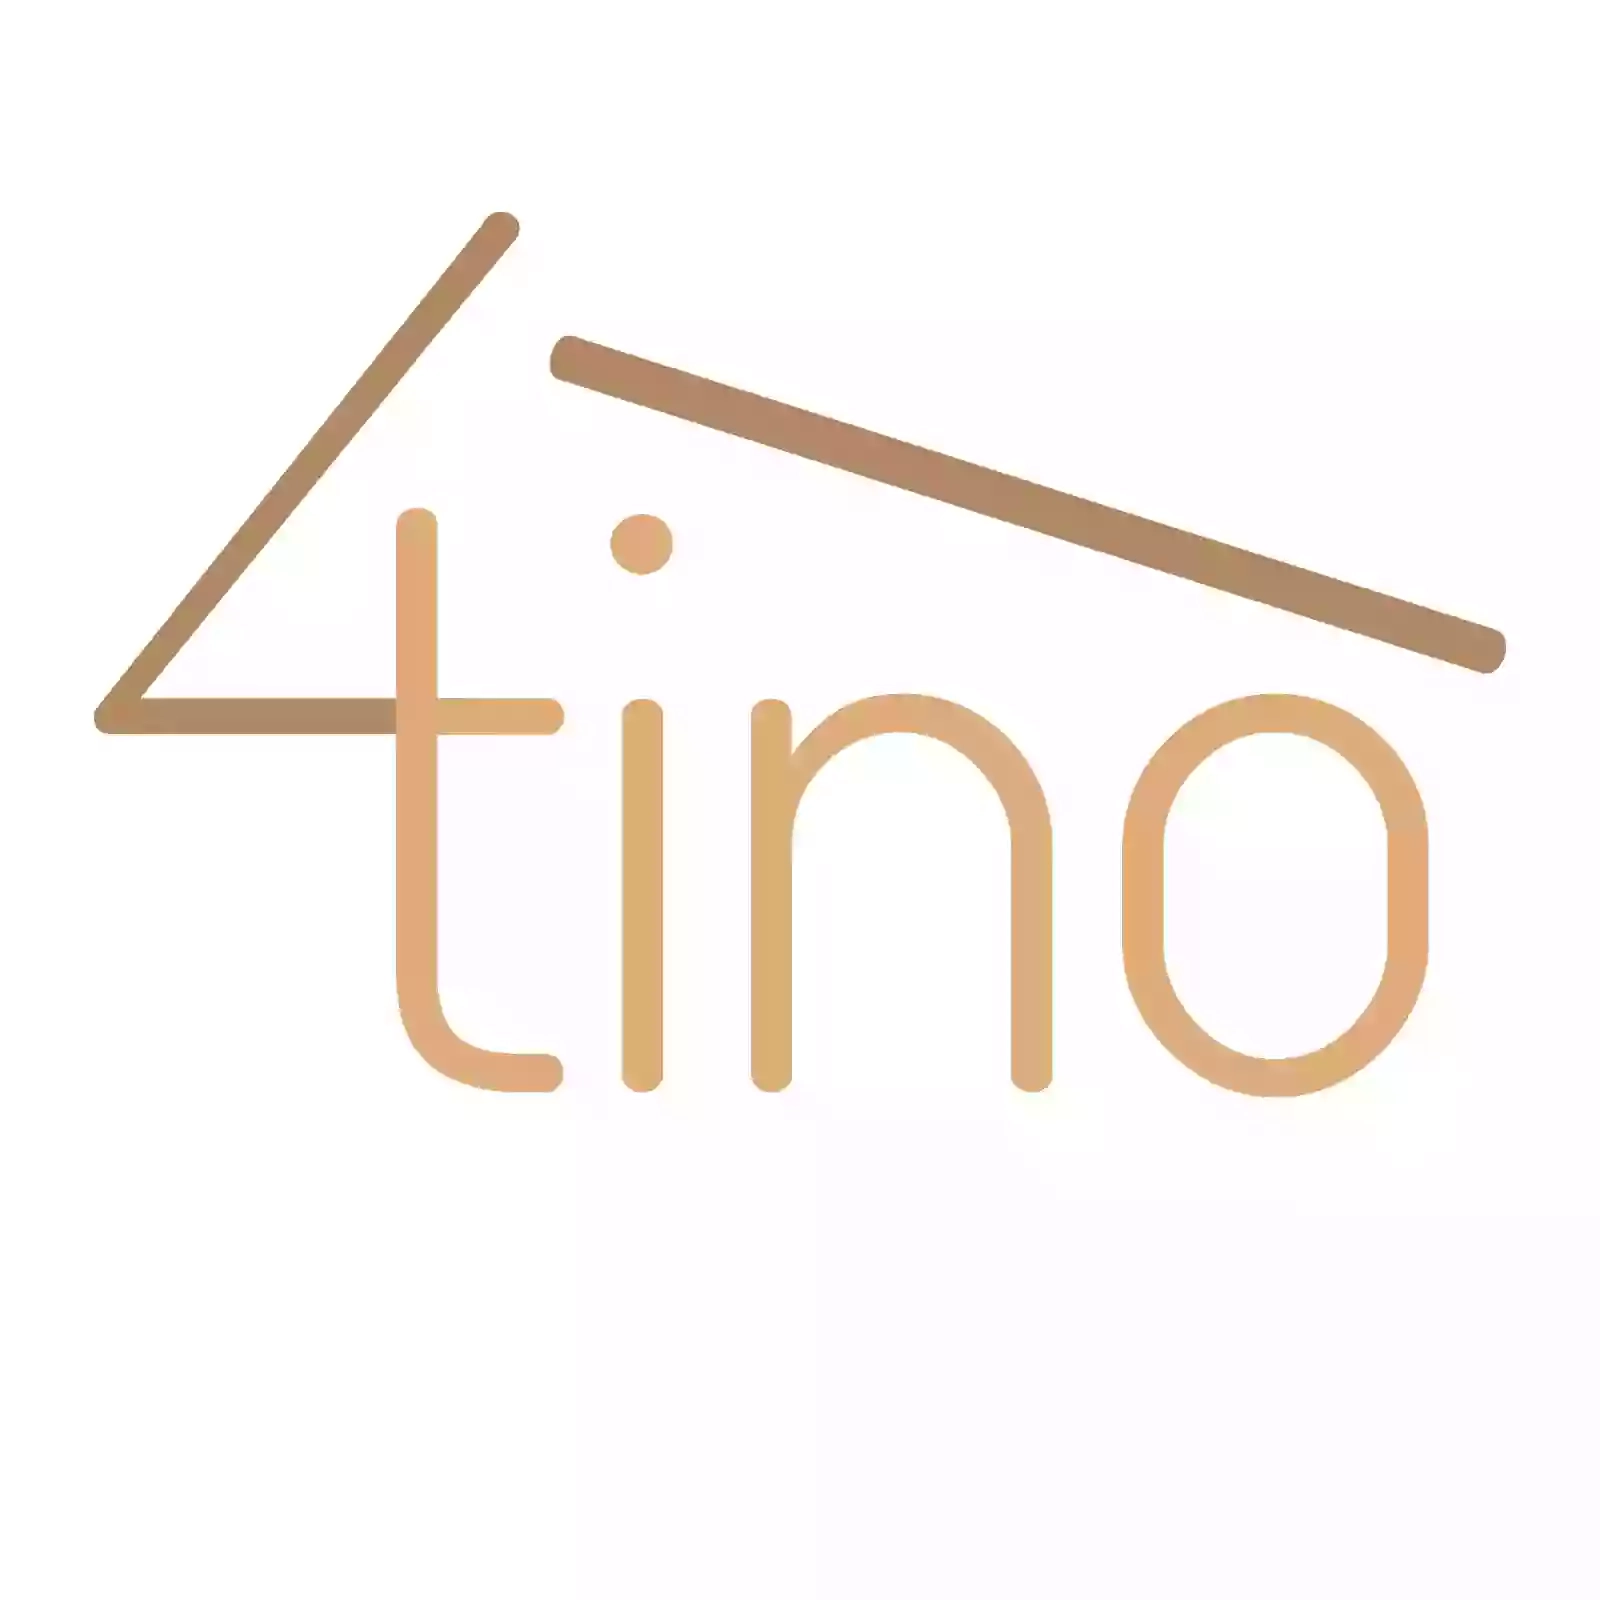 4tino Guest House